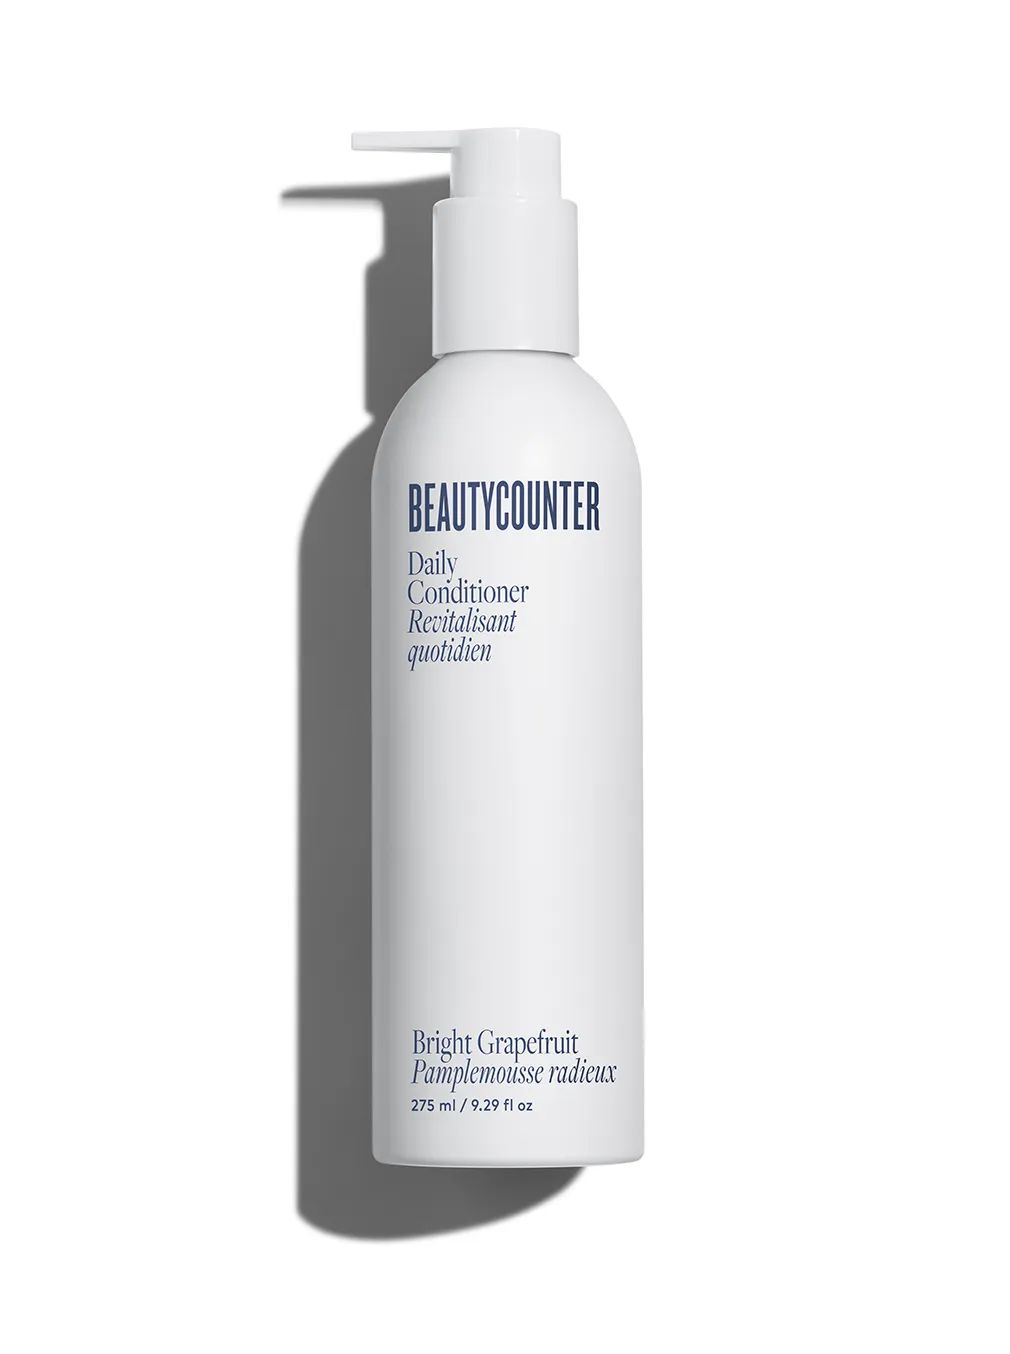 Daily Conditioner in Bright Grapefruit - Beautycounter - Skin Care, Makeup, Bath and Body and mor... | Beautycounter.com